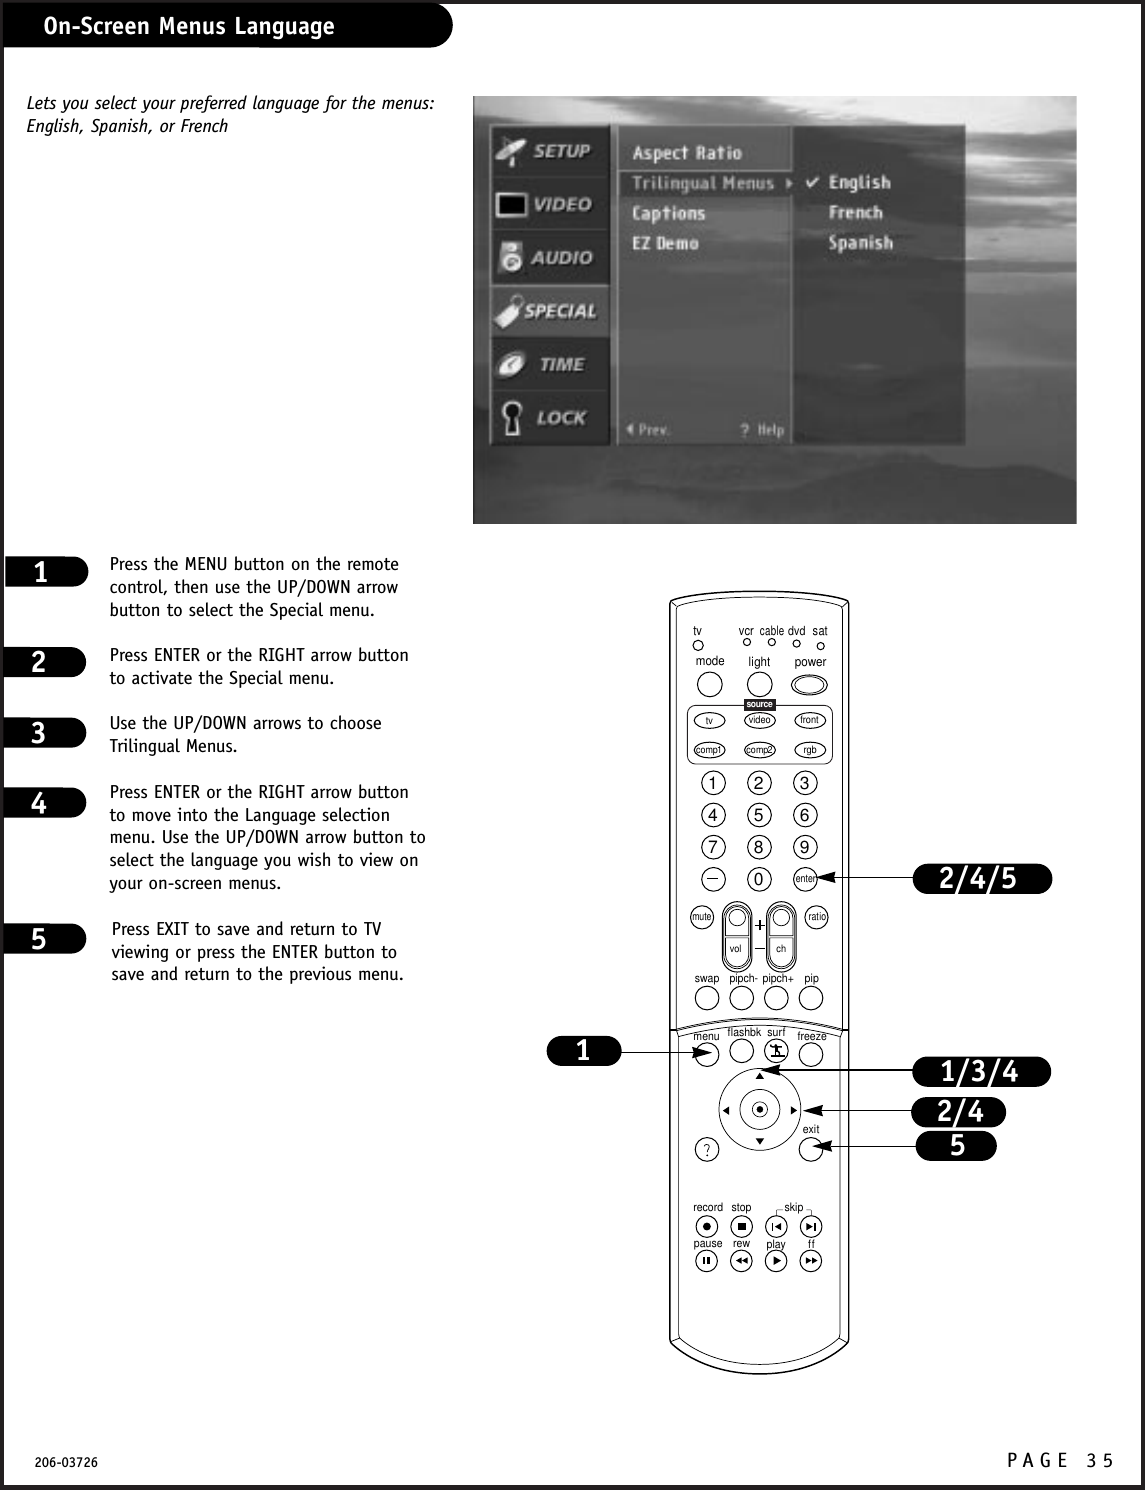 P A GE 35206-03726Press the MENU button on the remotecontrol, then use the UP/DOWN arrowbutton to select the Special menu.Press ENTER or the RIGHT arrow buttonto activate the Special menu.Use the UP/DOWN arrows to chooseTrilingual Menus.Press ENTER or the RIGHT arrow buttonto move into the Language selectionmenu. Use the UP/DOWN arrow button toselect the language you wish to view onyour on-screen menus.Press EXIT to save and return to TVviewing or press the ENTER button tosave and return to the previous menu.12341234567890tvmode light power   tv video frontcomp1 rgbvcrcabledvdsatmuteswap pipch- pipch+ pipmenurecord stoppause rew play ffexitflashbk surf freezevol chratiocomp2skipsourceenter1/3/4515Lets you select your preferred language for the menus:English, Spanish, or FrenchOn-Screen Menus Language2/42/4/5